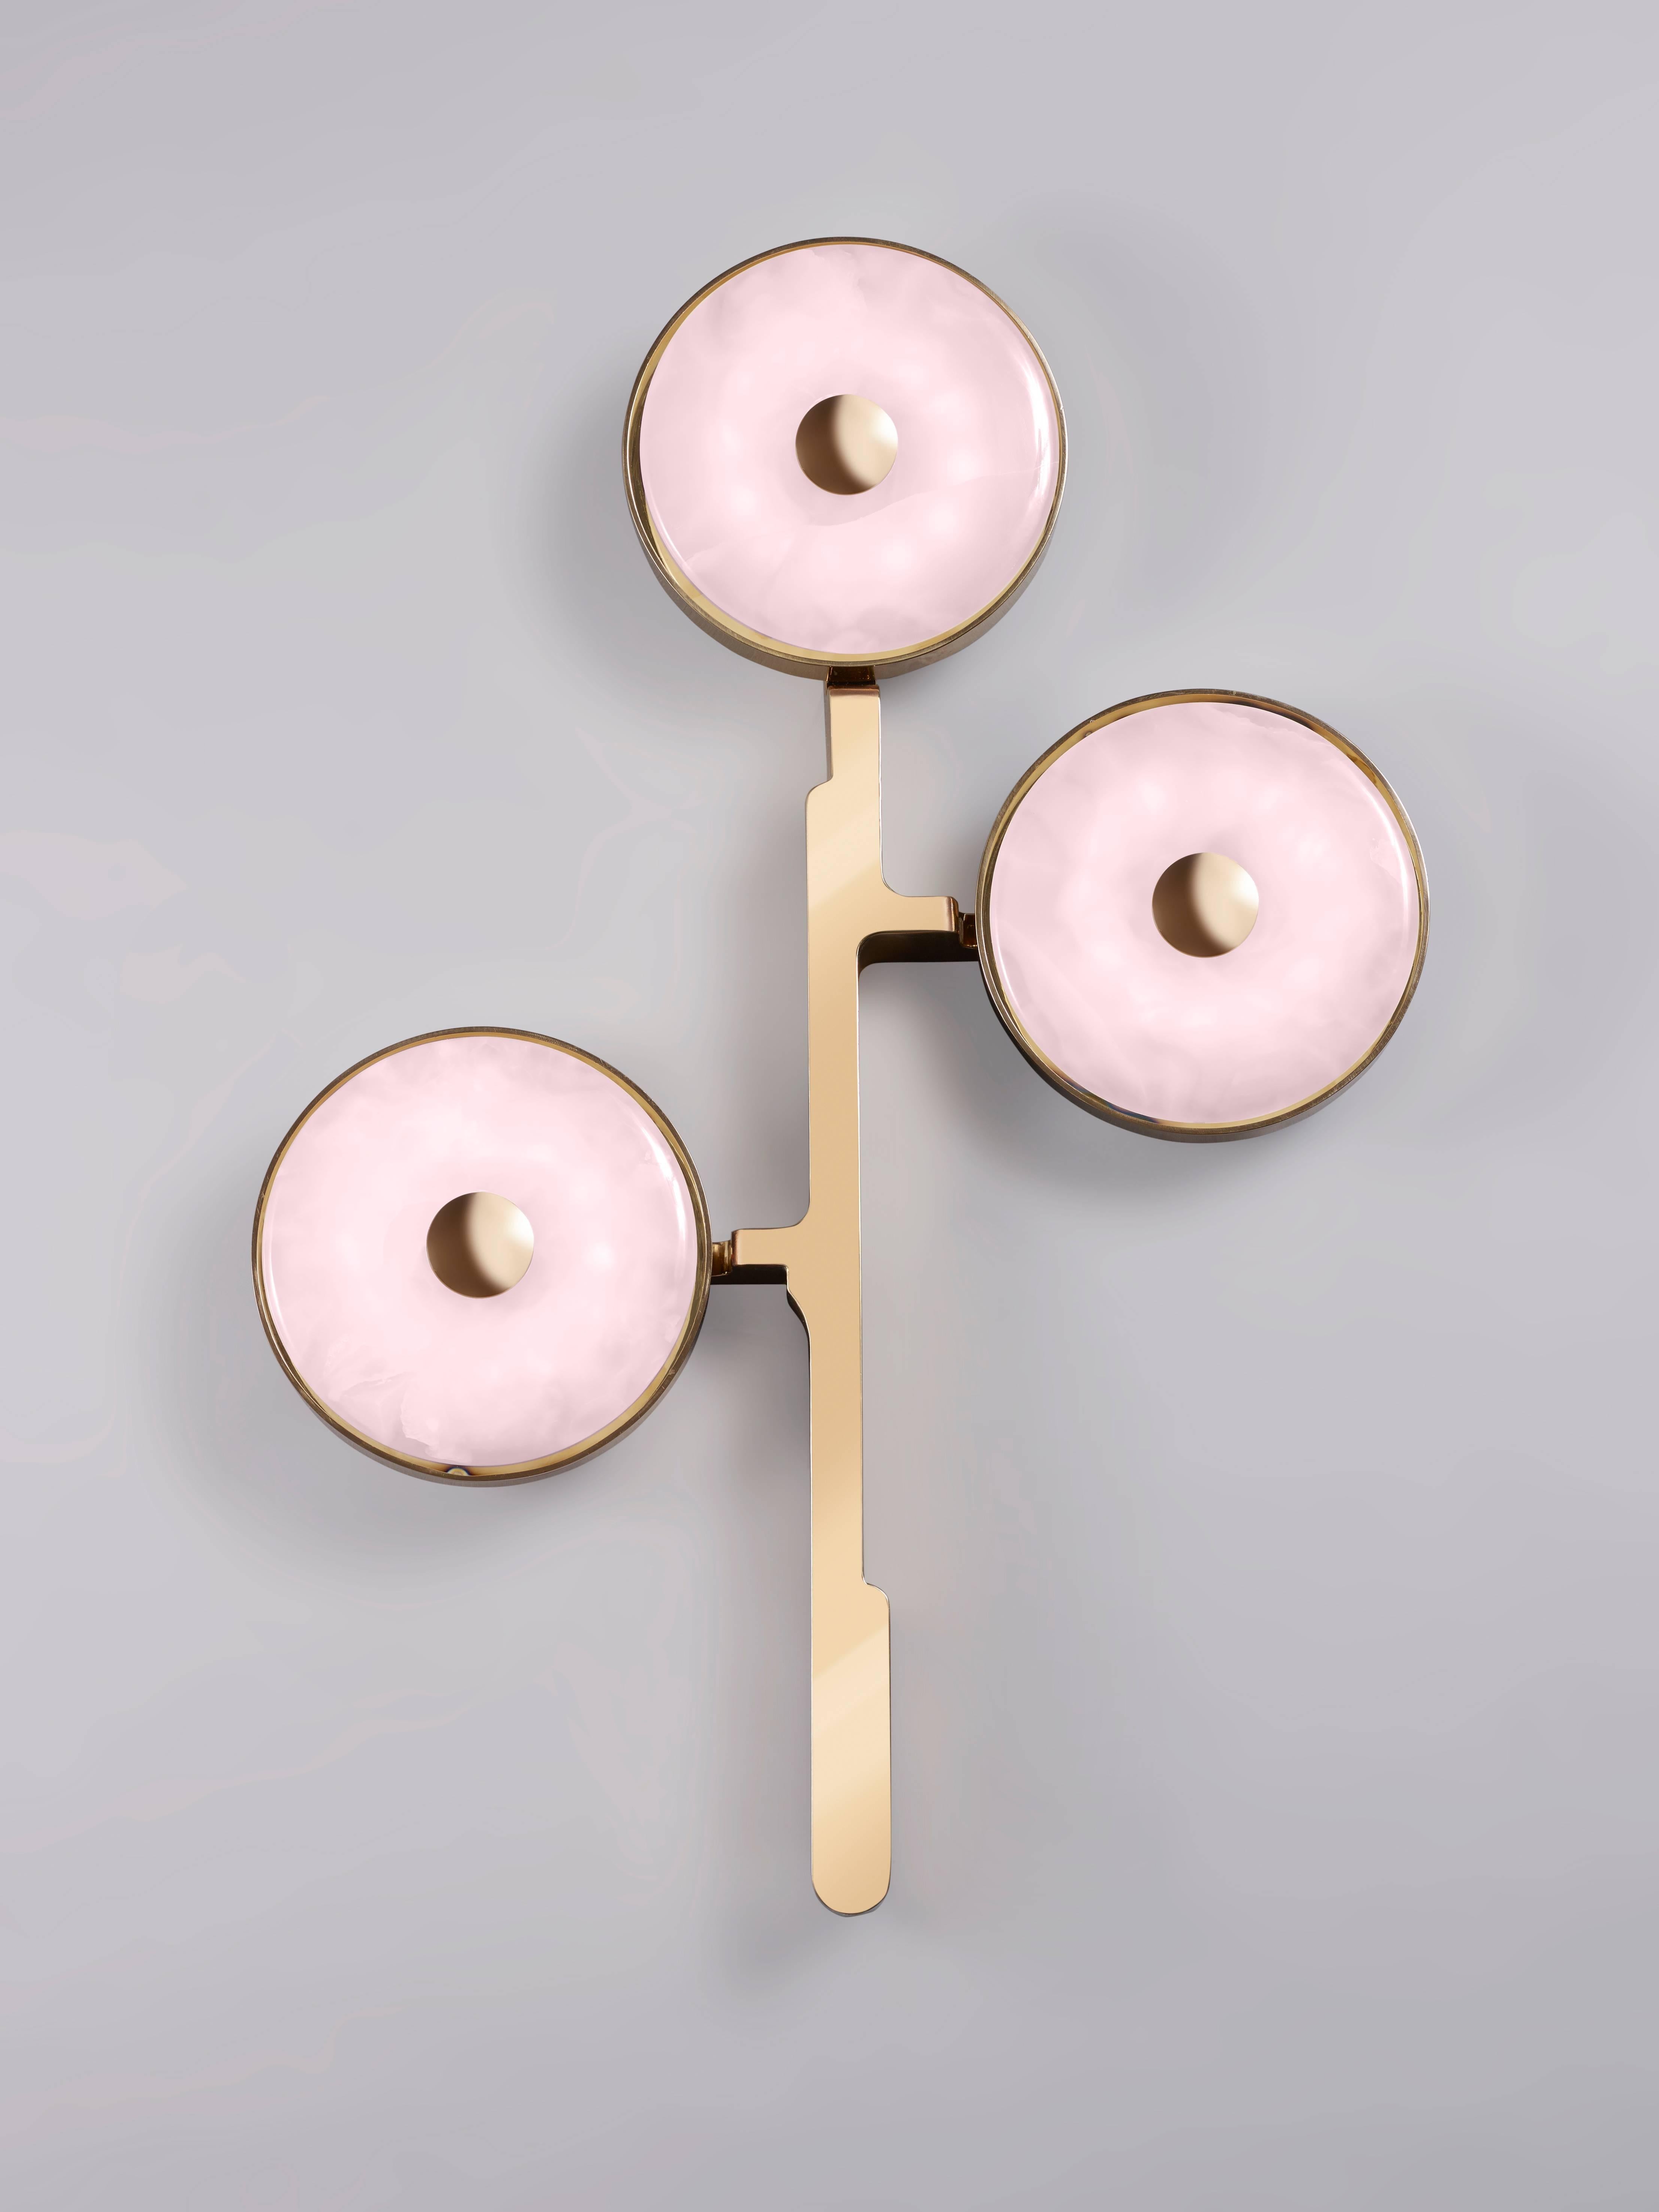 The 'JinShi Pink Jade' glamorous sconce by acclaimed design duo Studio MVW is a true jewel for the home. Pricing is for a set of two. Each sconce encompasses three retro-lit heads in natural pink jade, an exceptional gemstone with a sumptuous powder